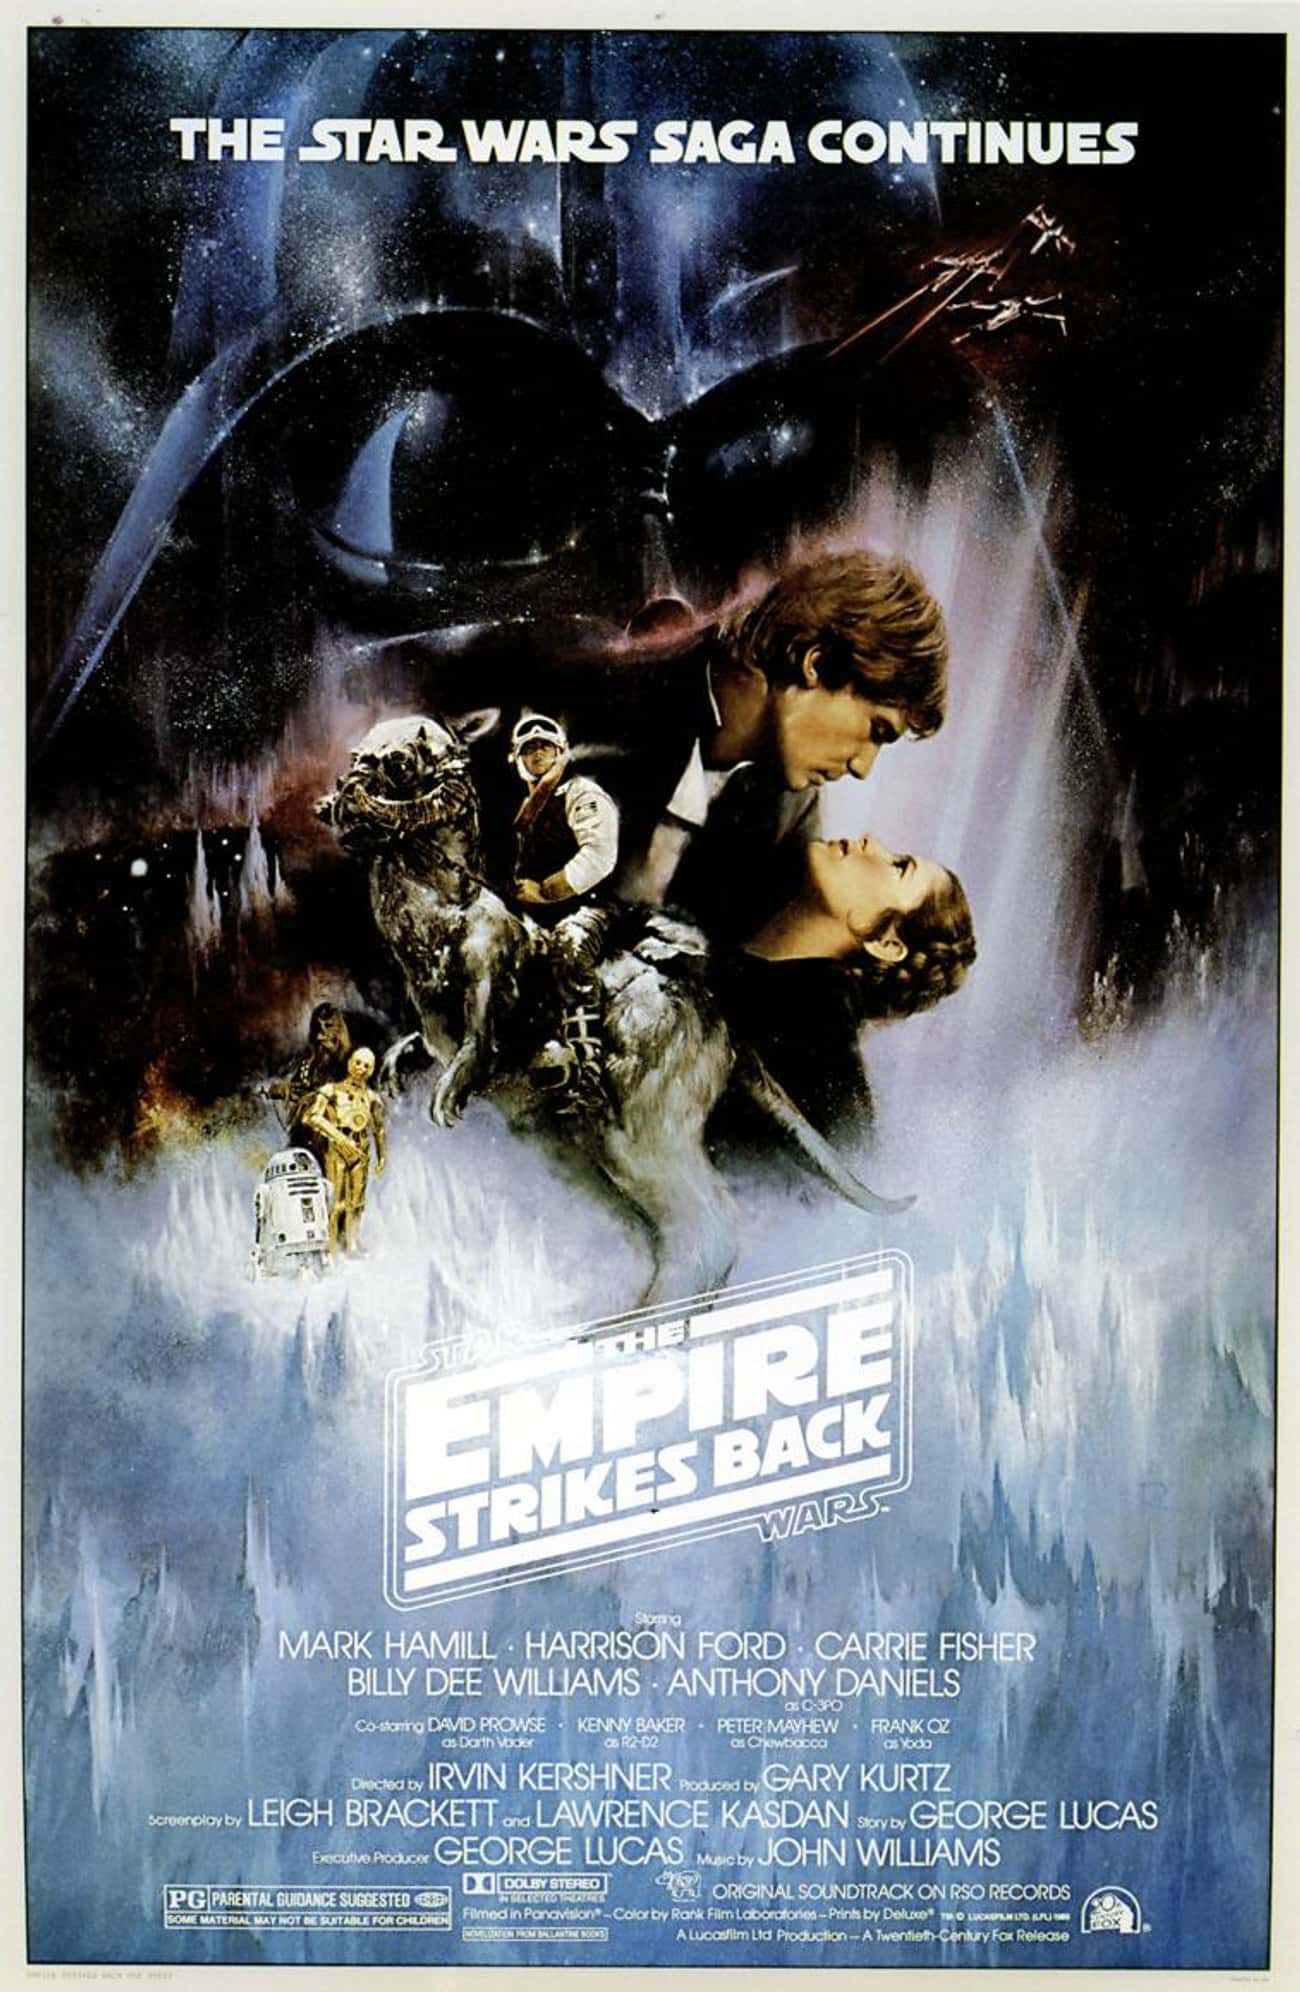 The Empire Strikes Back style a theatrical release poster